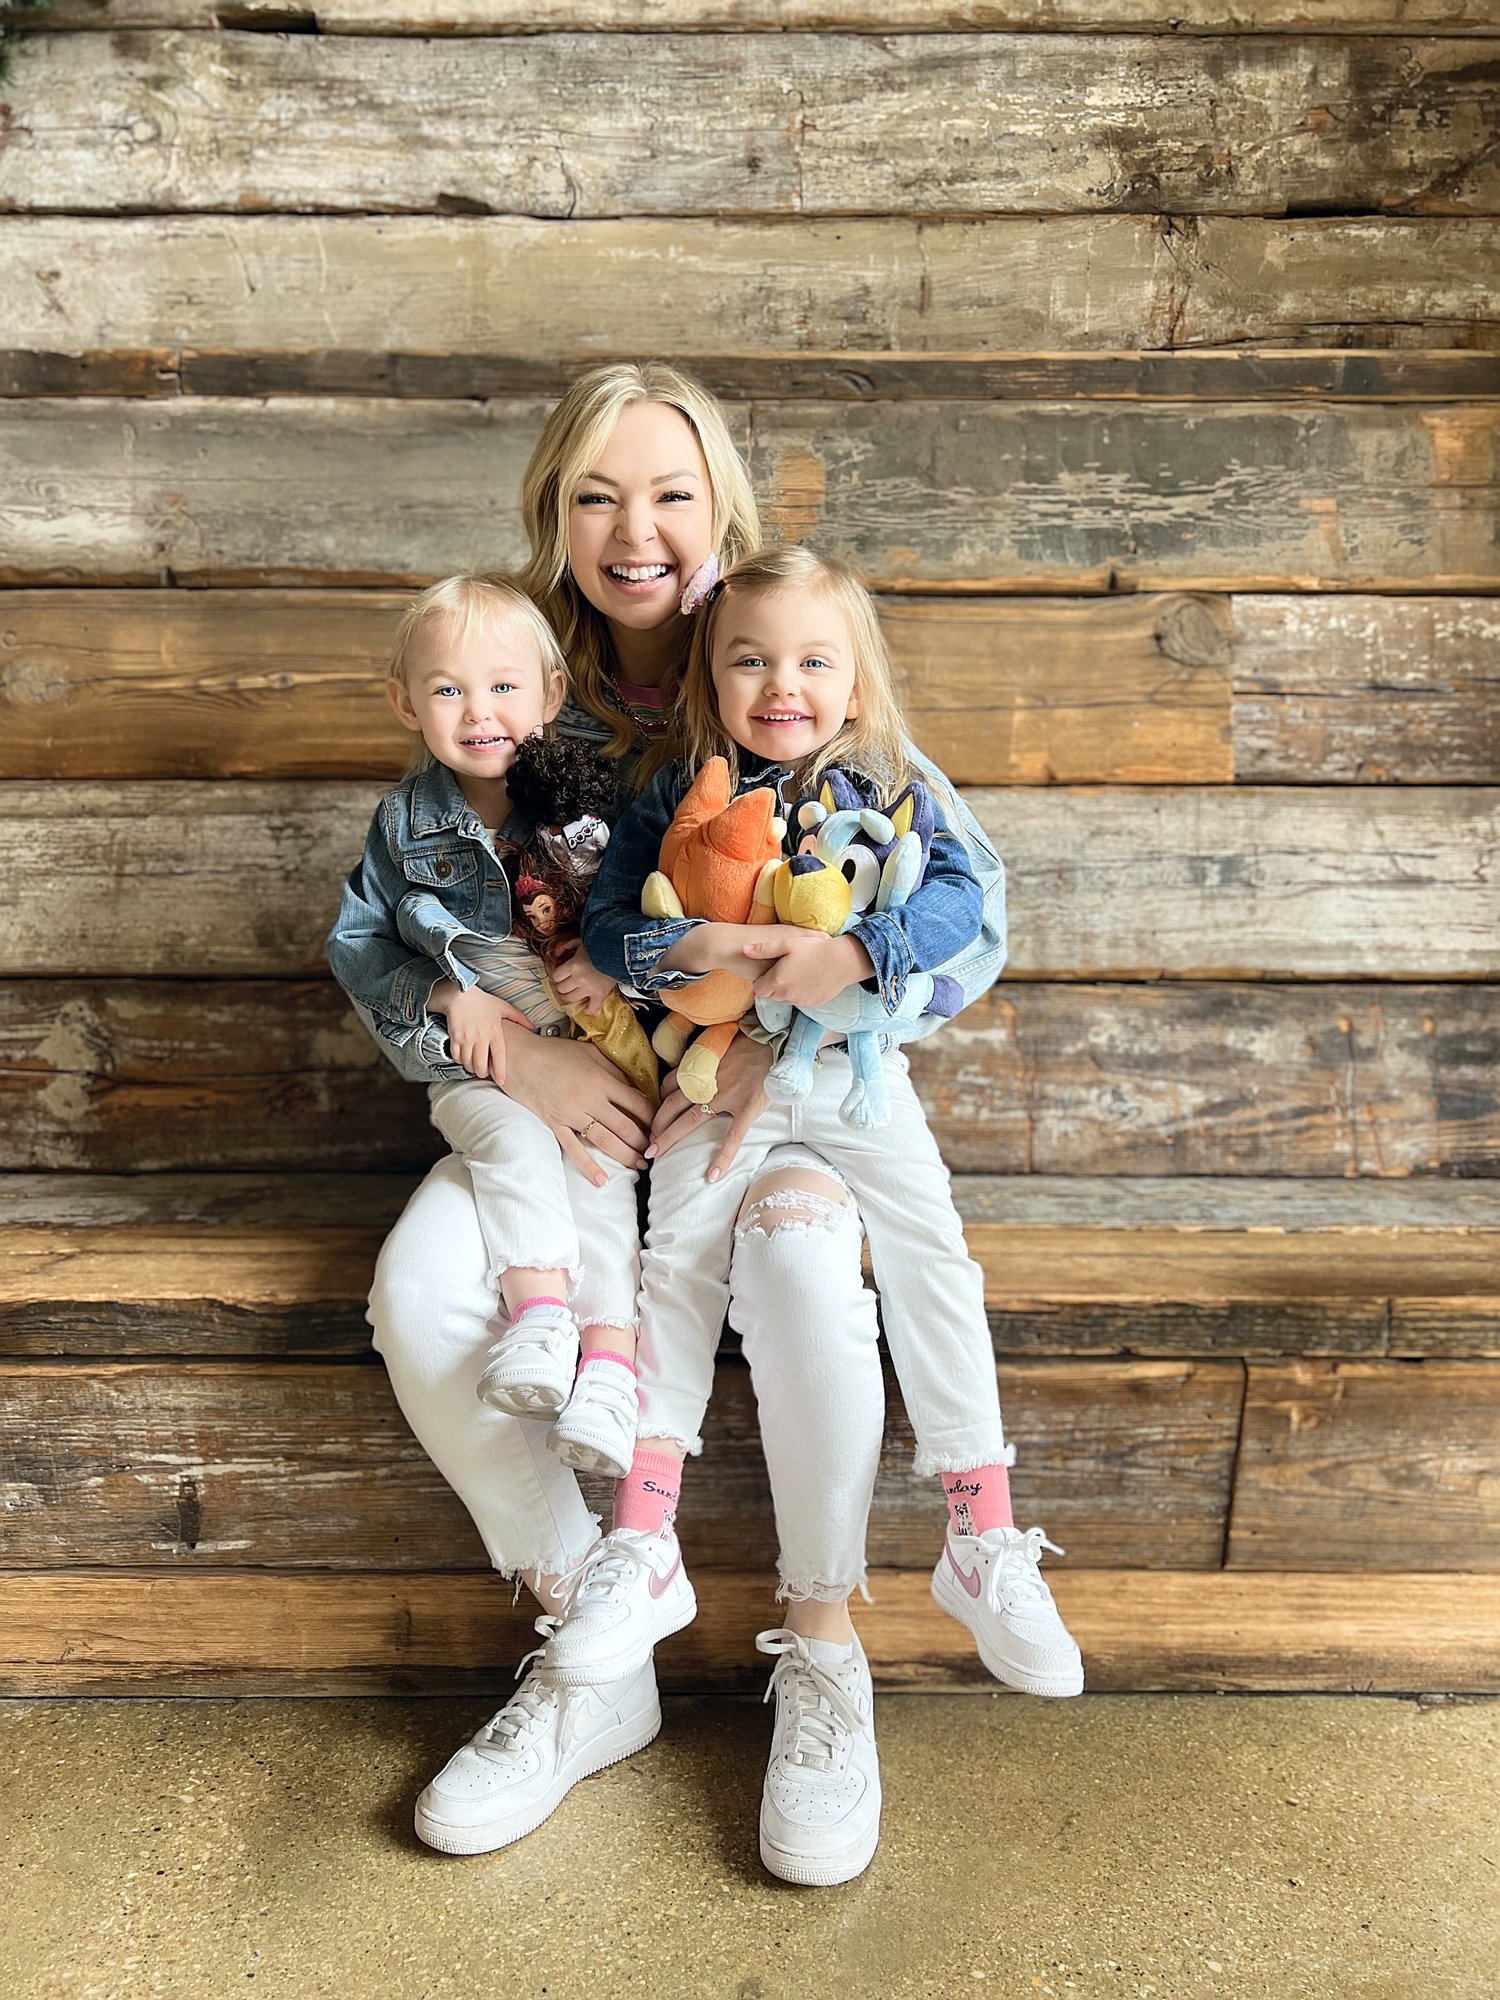 Jess Roe, The Windy City Mama with her two daughters.